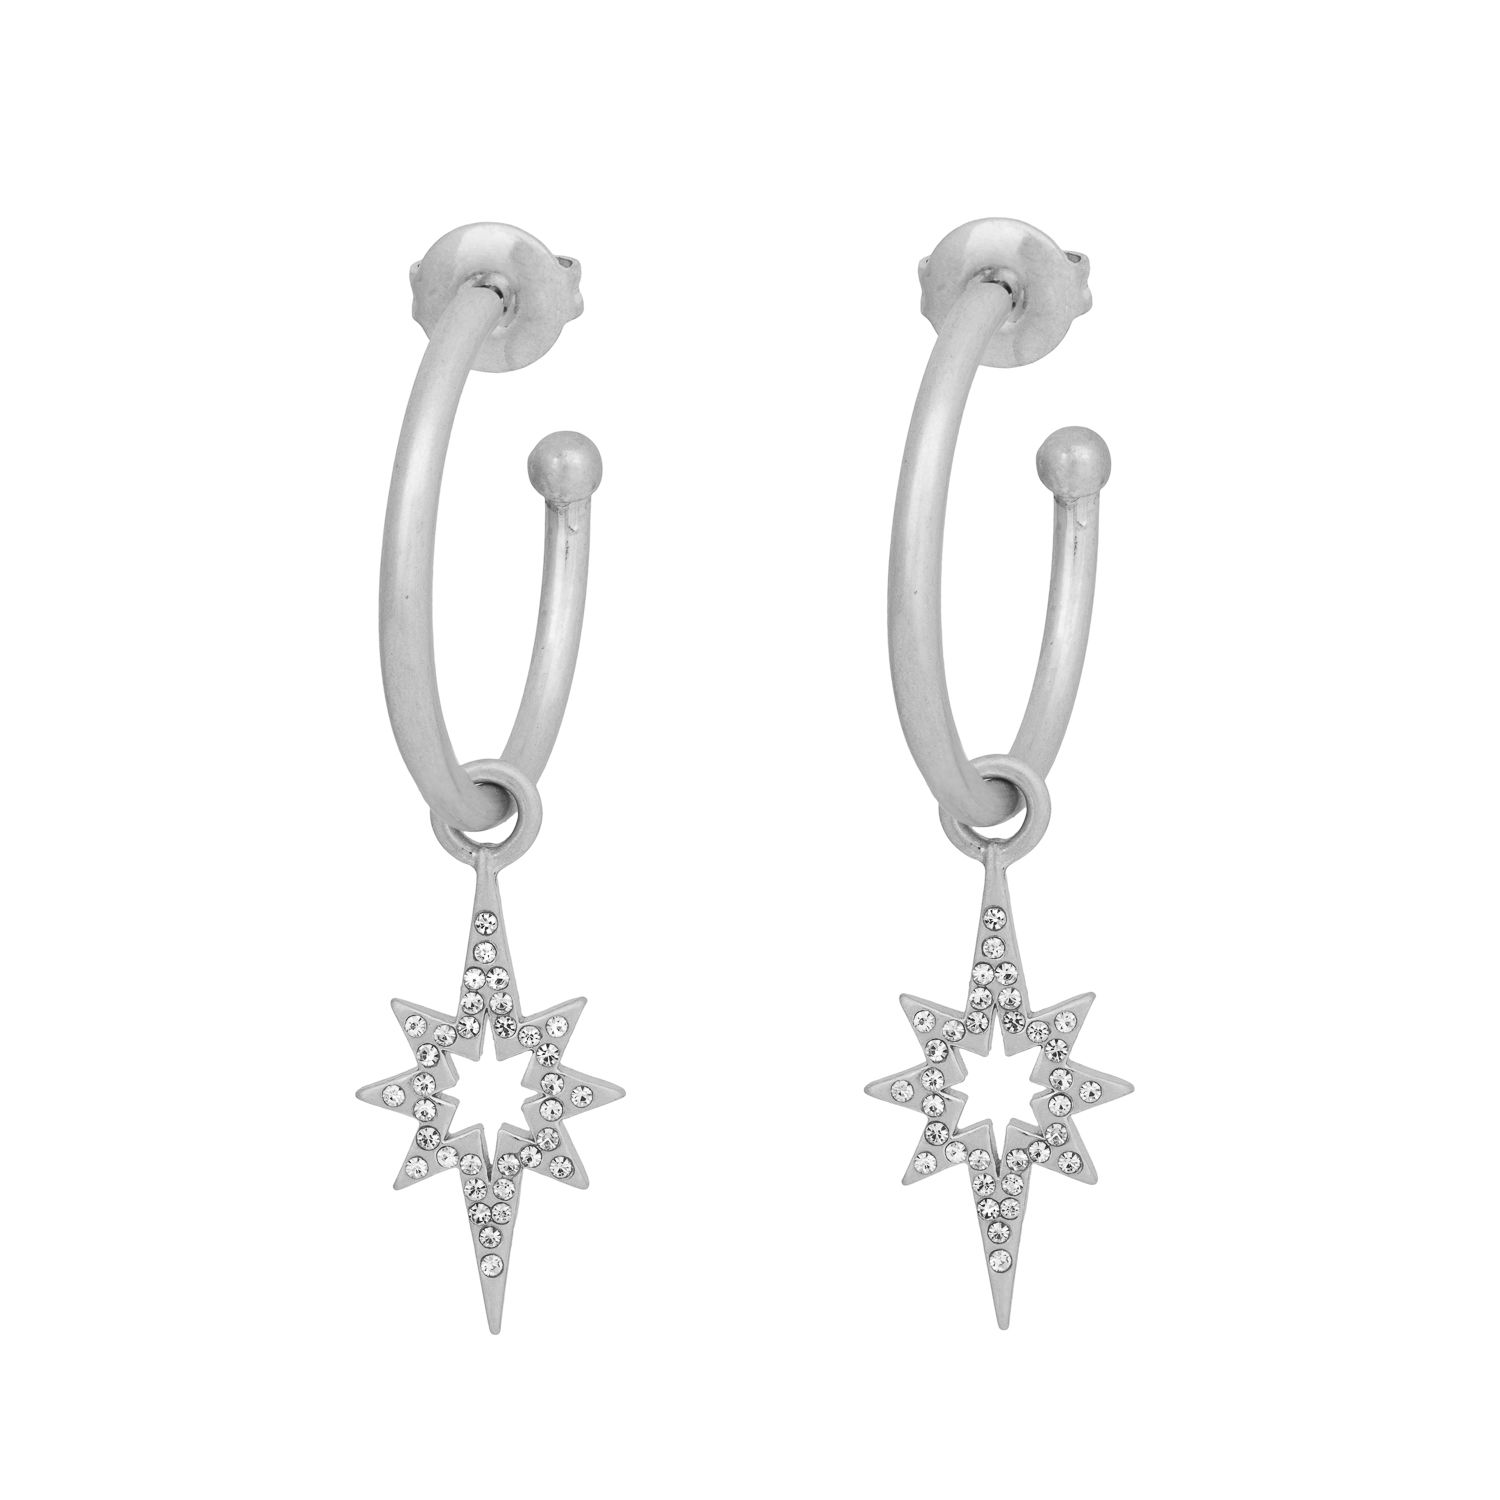 Our new Kate Thornton silver plated 'Celeste' star drop earrings will really make a style statement this season. A striking piece of jewellery which makes the perfect accompaniment to any outfit.  Delicate, eye catching and with a contemporary edge these drop earrings will look great when worn alone or paired with other styles for a really on trend look. The silver tone earrings feature an 18mm hoop and delicate 27mm pave star charm. Presented in a KTx jewellery pouch to keep your jewellery safe or ideal for gifting!